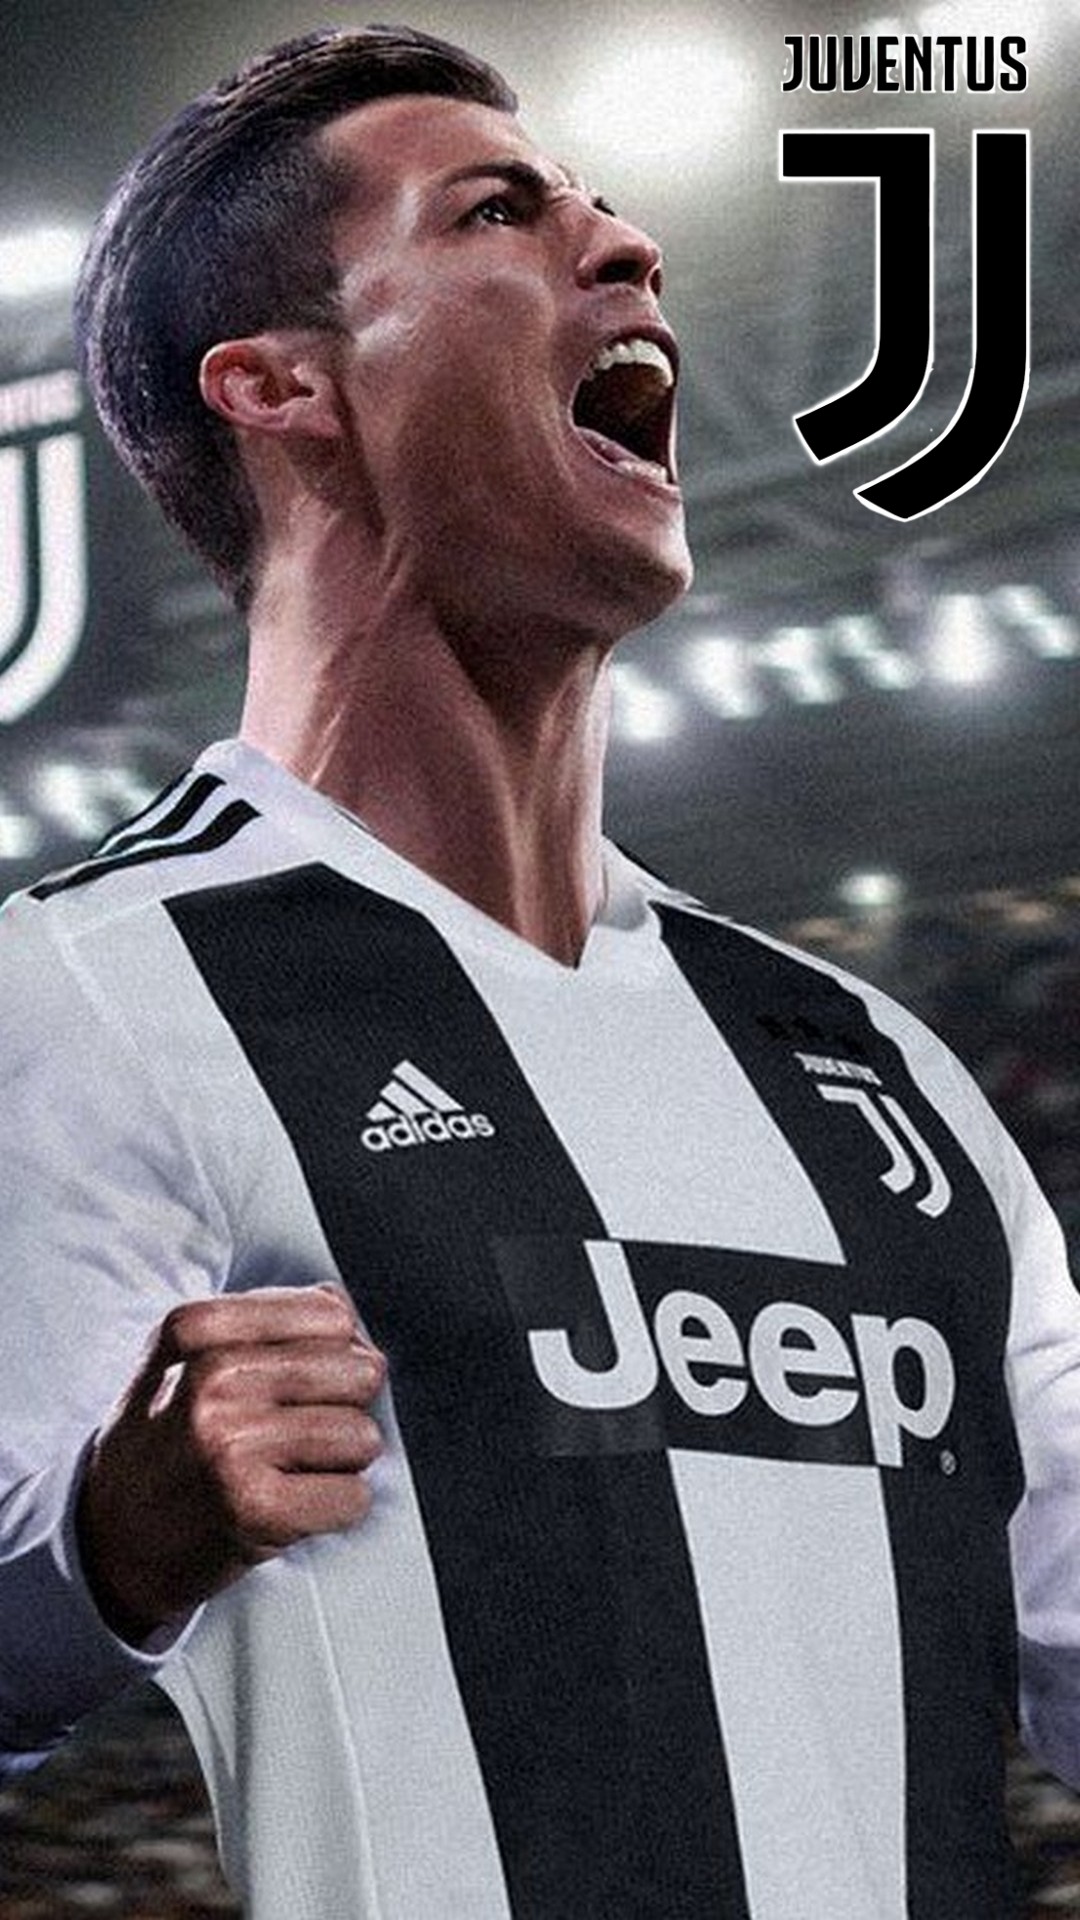 Cristiano Ronaldo Juventus Mobile Wallpaper With Resolution 1080X1920 pixel. You can make this wallpaper for your Mac or Windows Desktop Background, iPhone, Android or Tablet and another Smartphone device for free